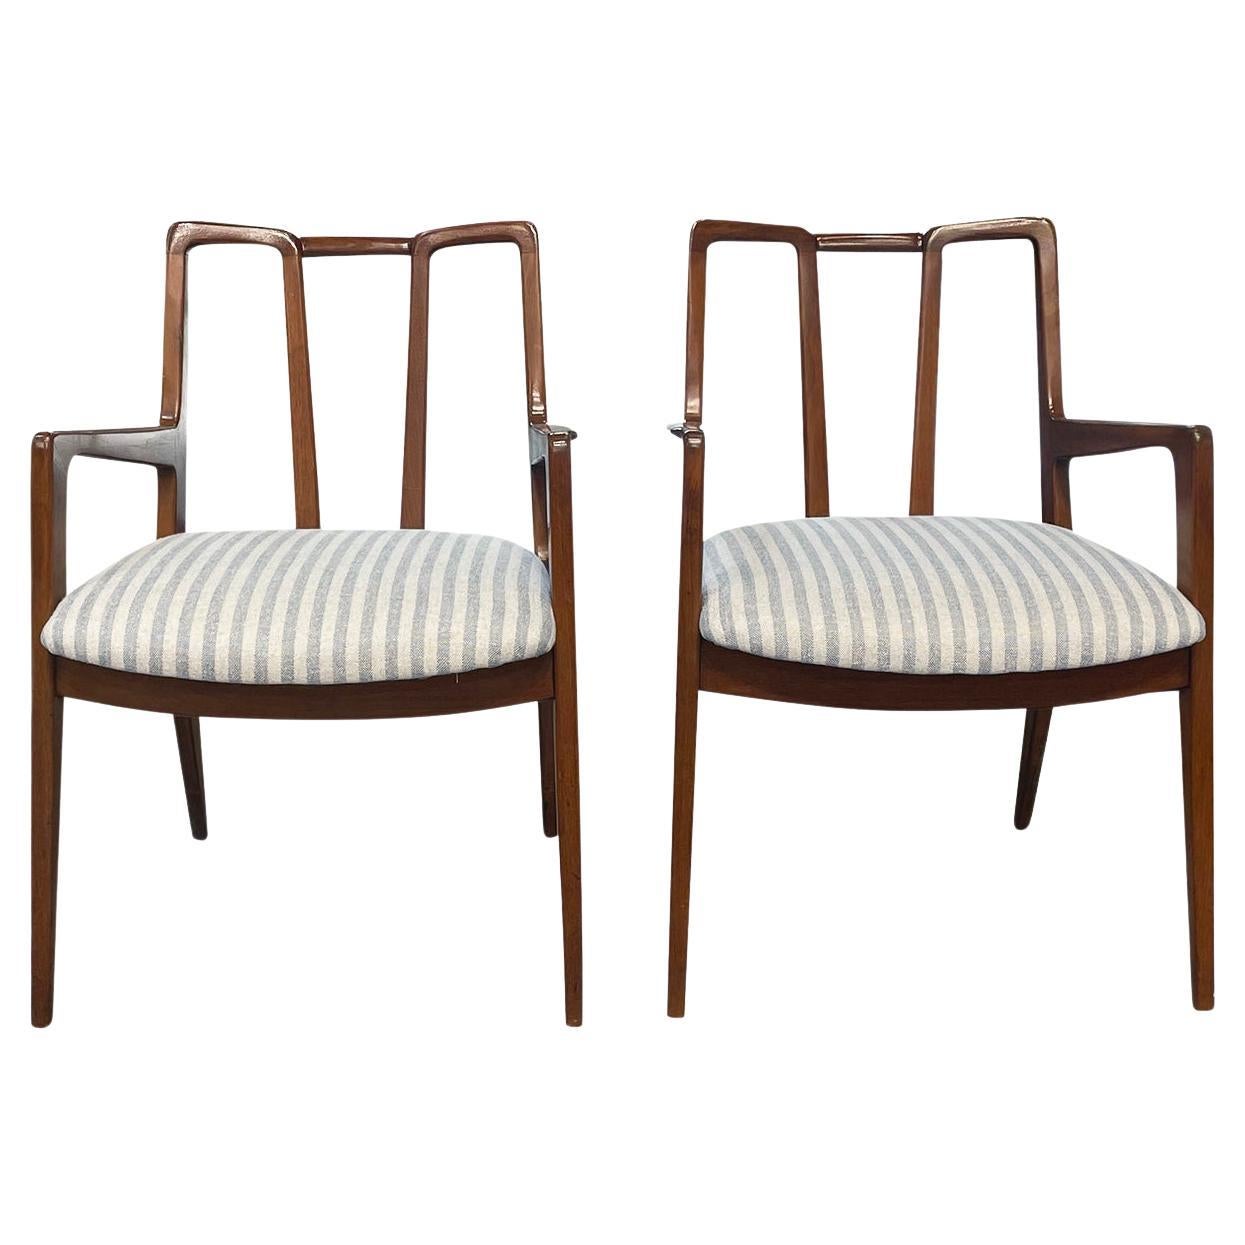 20th Century American Pair of Walnut Armchairs - Dining Chairs by John Stuart For Sale